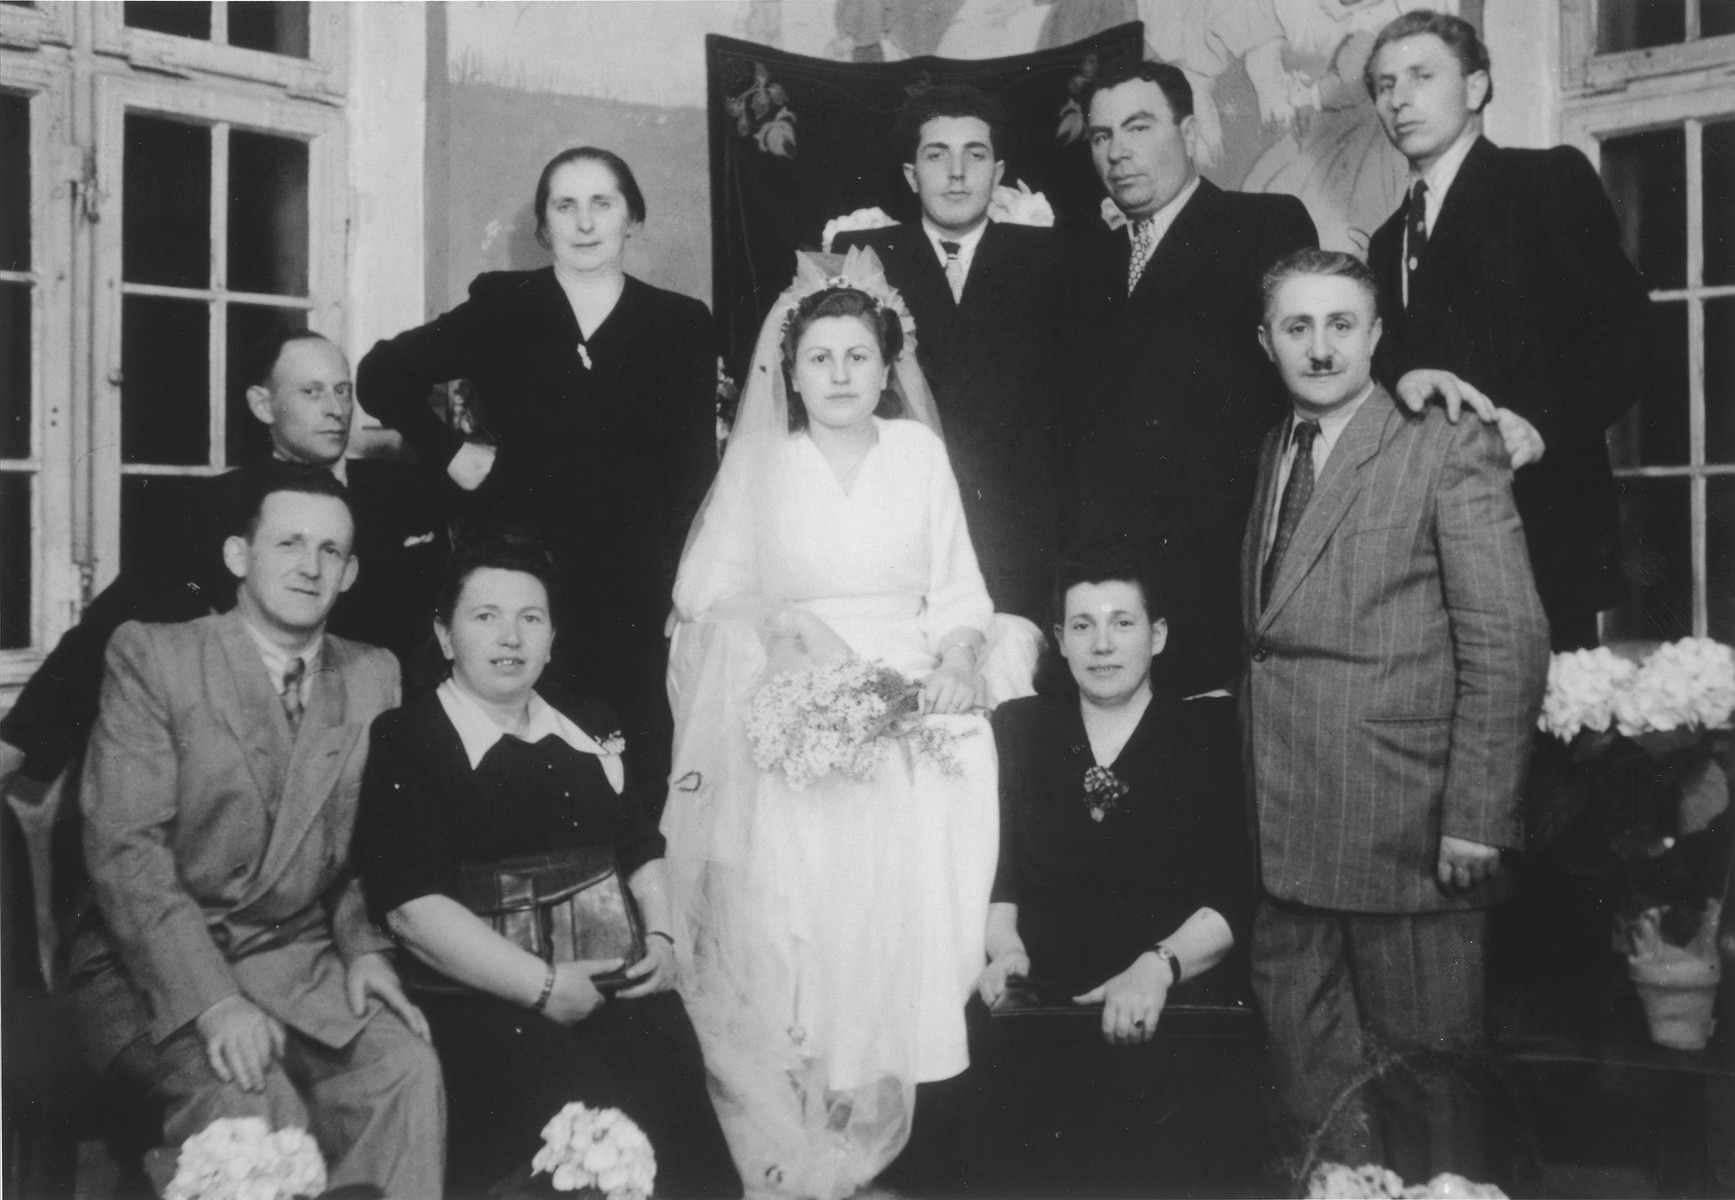 Group portrait of members of a wedding party in the Ulm displaced persons camp.

Among those pictured are Hershel and Chaja Rajs (bottom left).